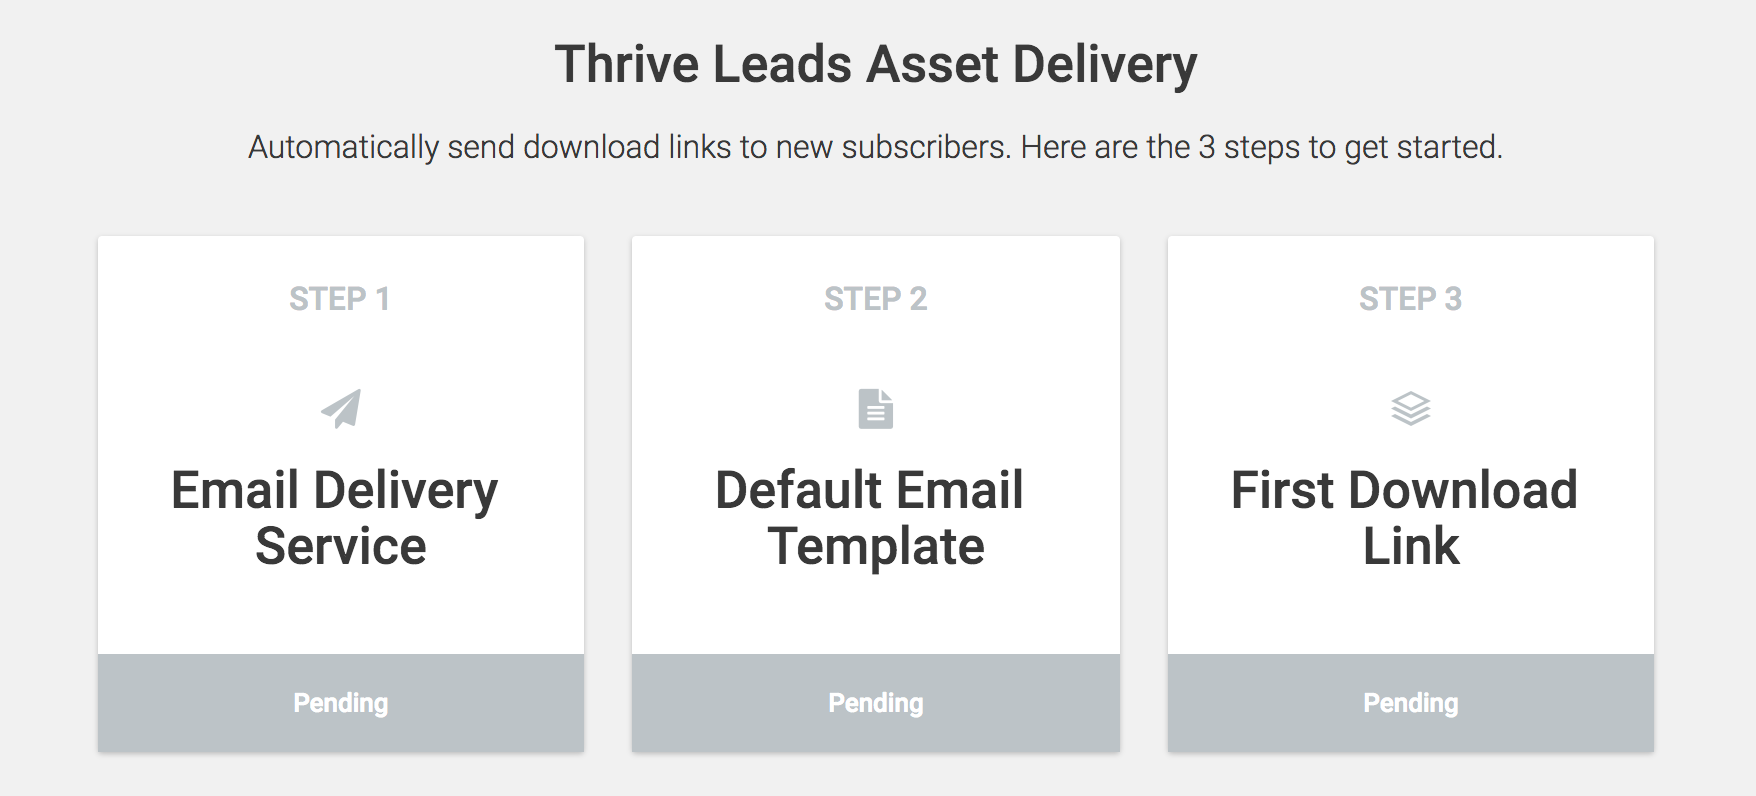 Thrive Leads allows you to send a download link to new subscribers to your email list.